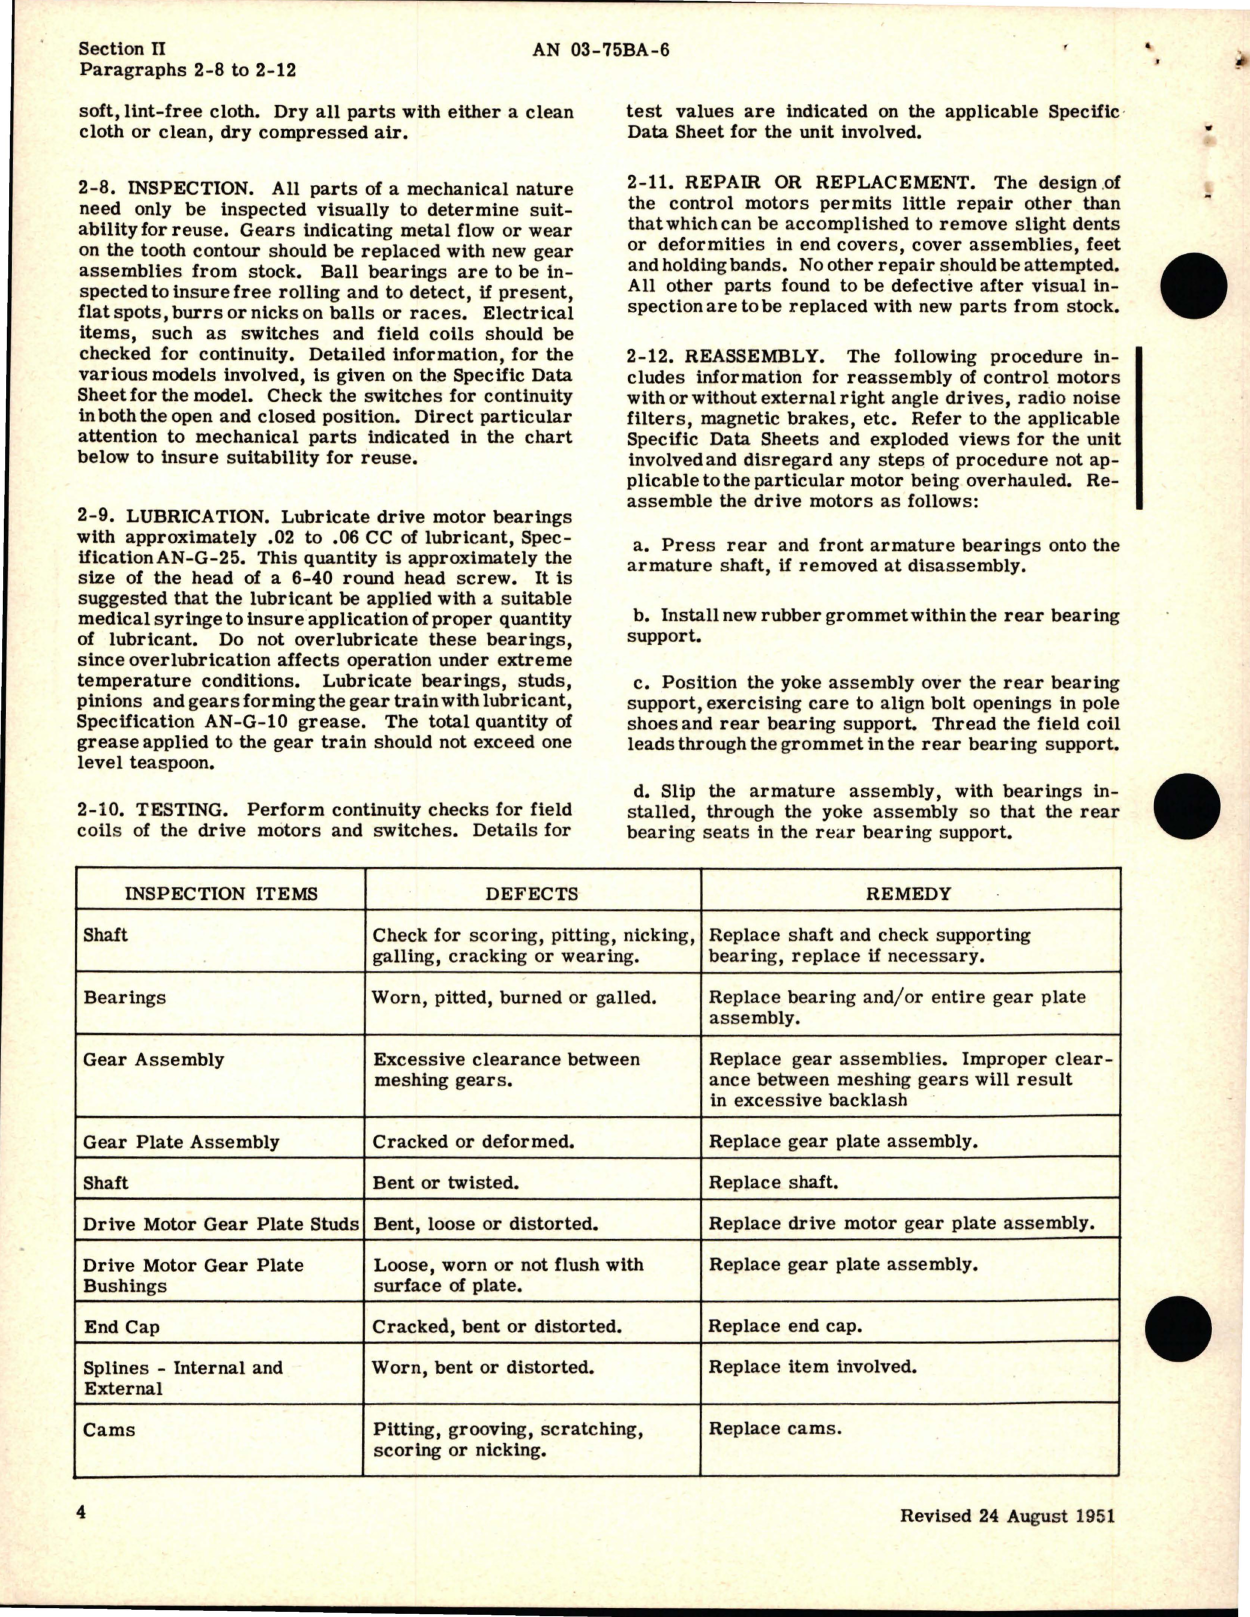 Sample page 8 from AirCorps Library document: Overhaul Instructions for Control Motors, Part AYLC Series 